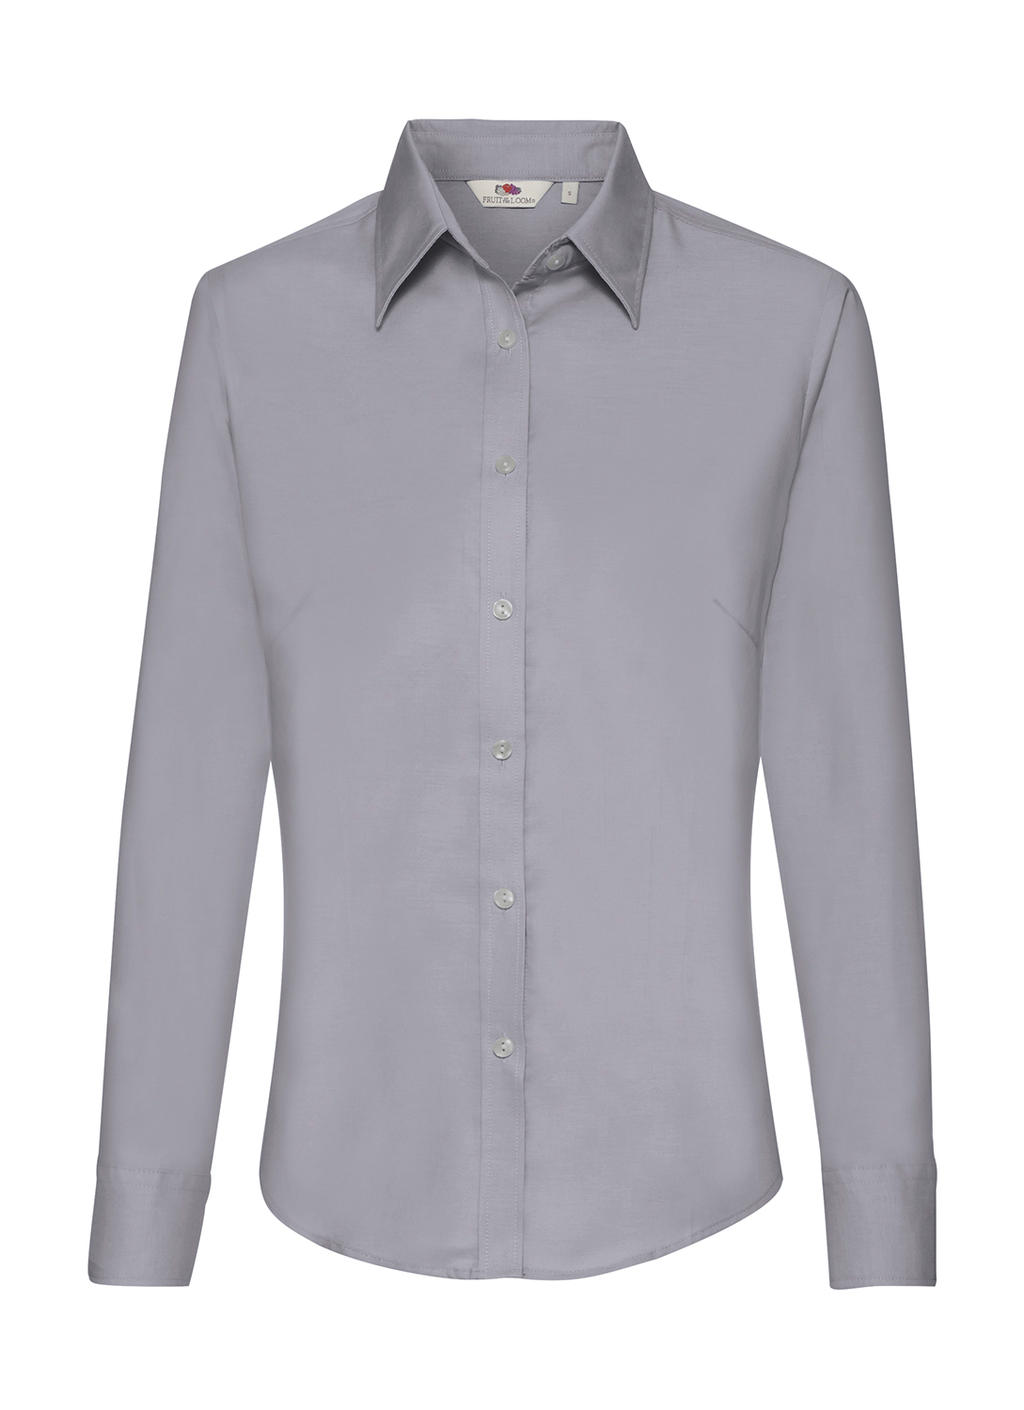  Ladies Oxford Shirt LS in Farbe Oxford Grey